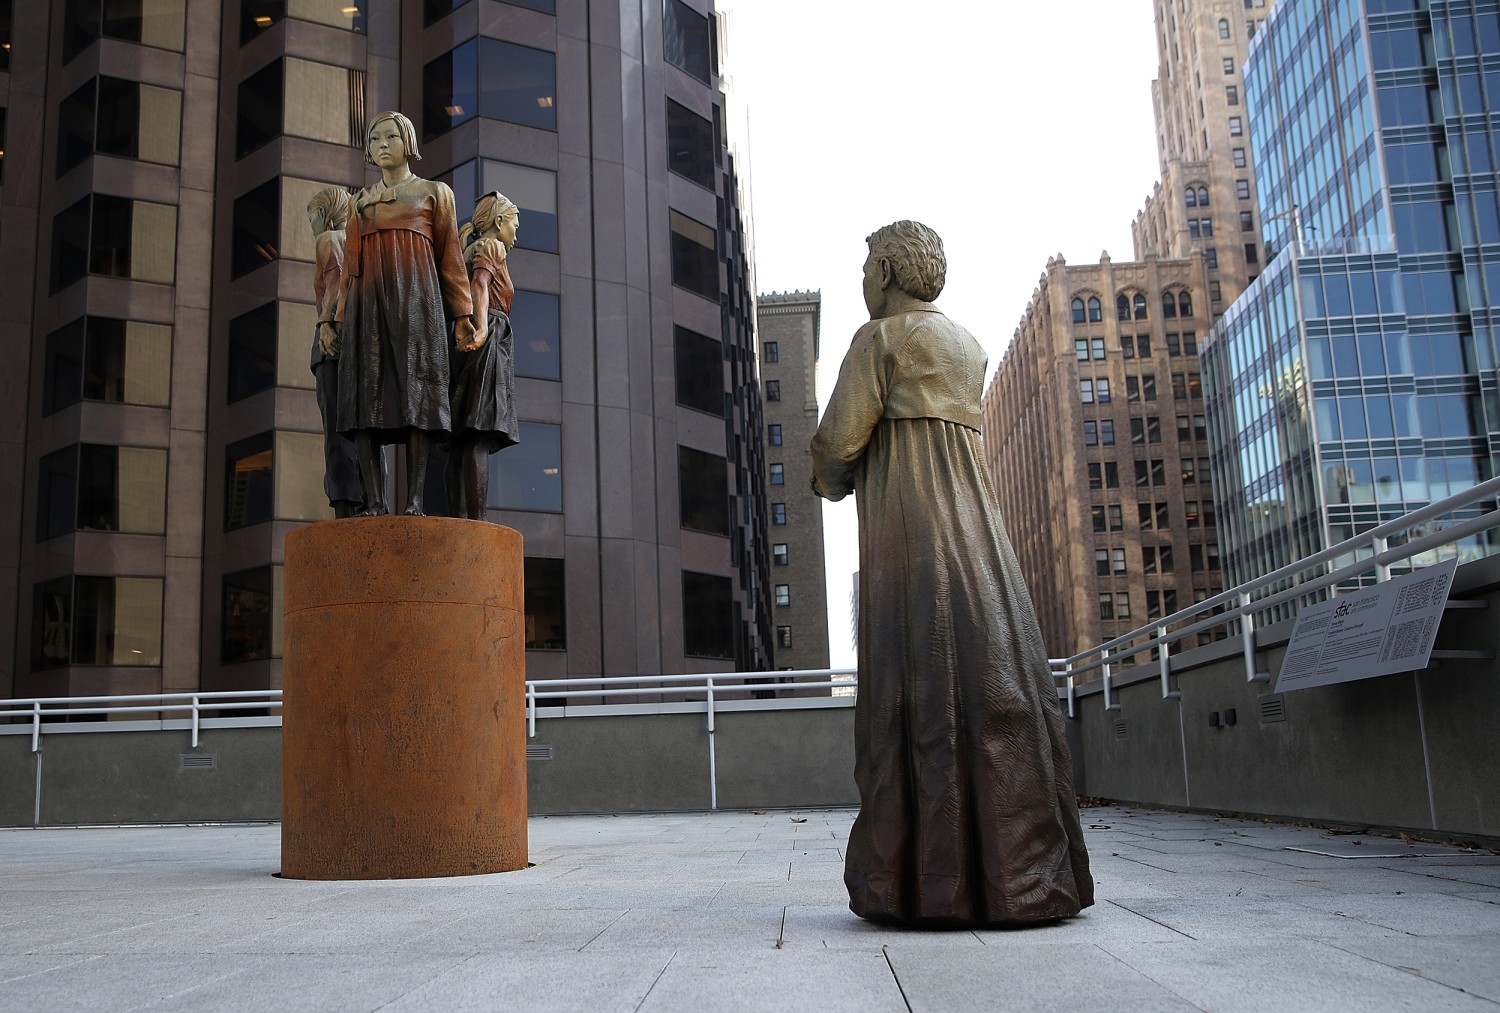 Who are the comfort women, and why are U.S.-based memorials for them controversial? photo image